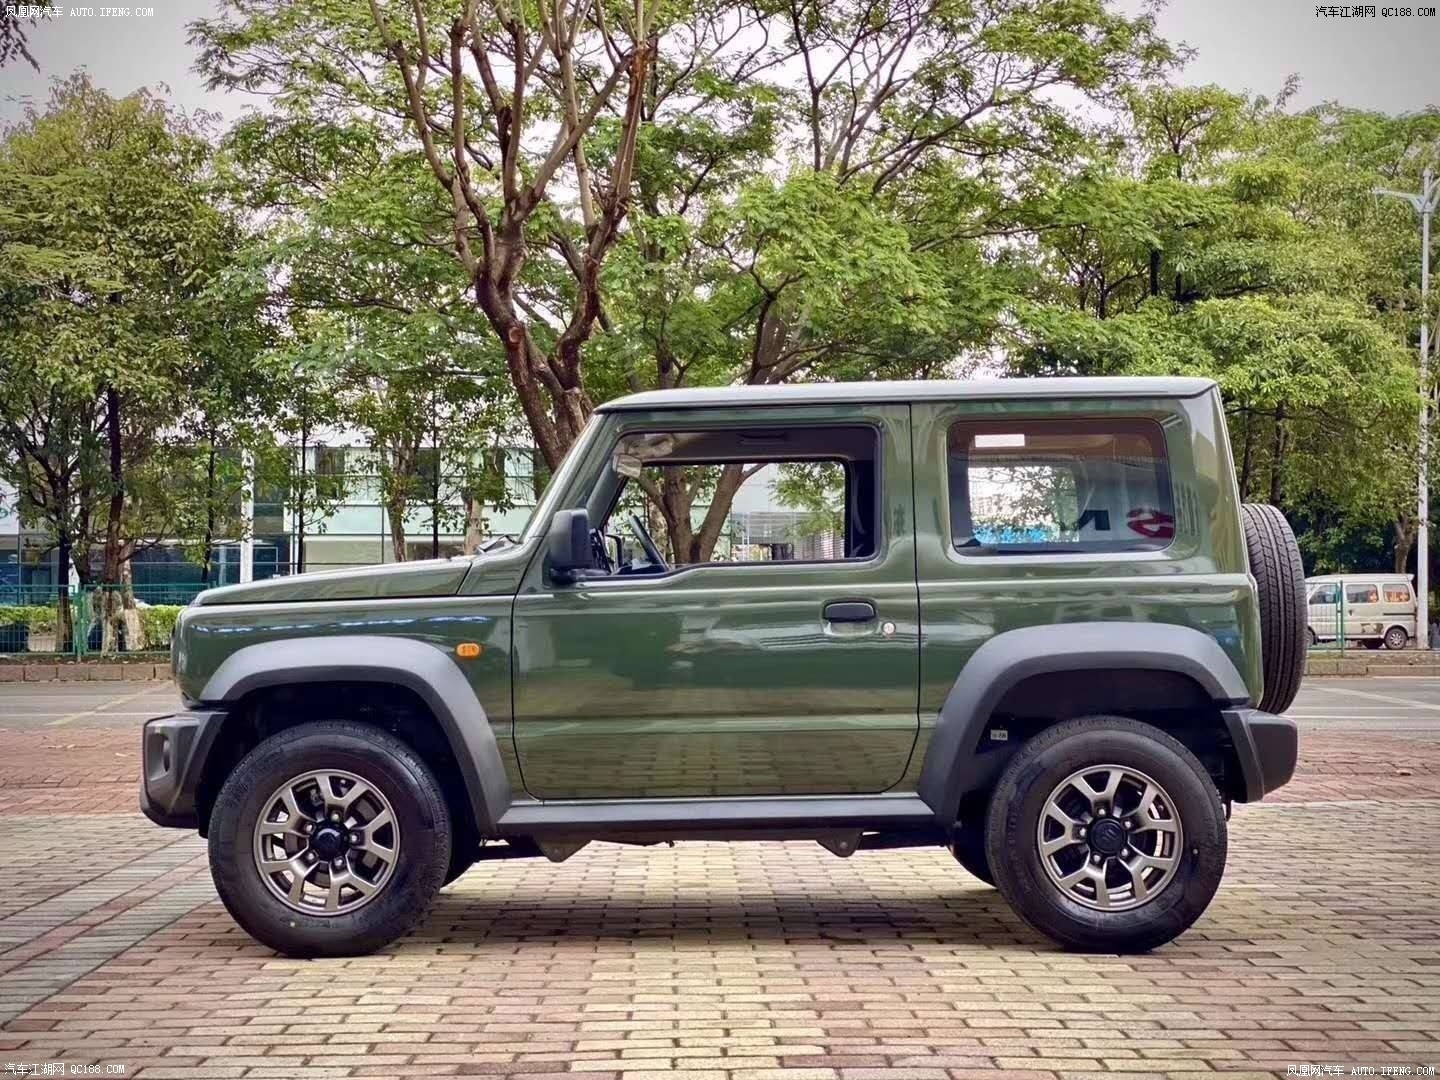 2019 Suzuki Jimny review: and they called it 'puppy love'